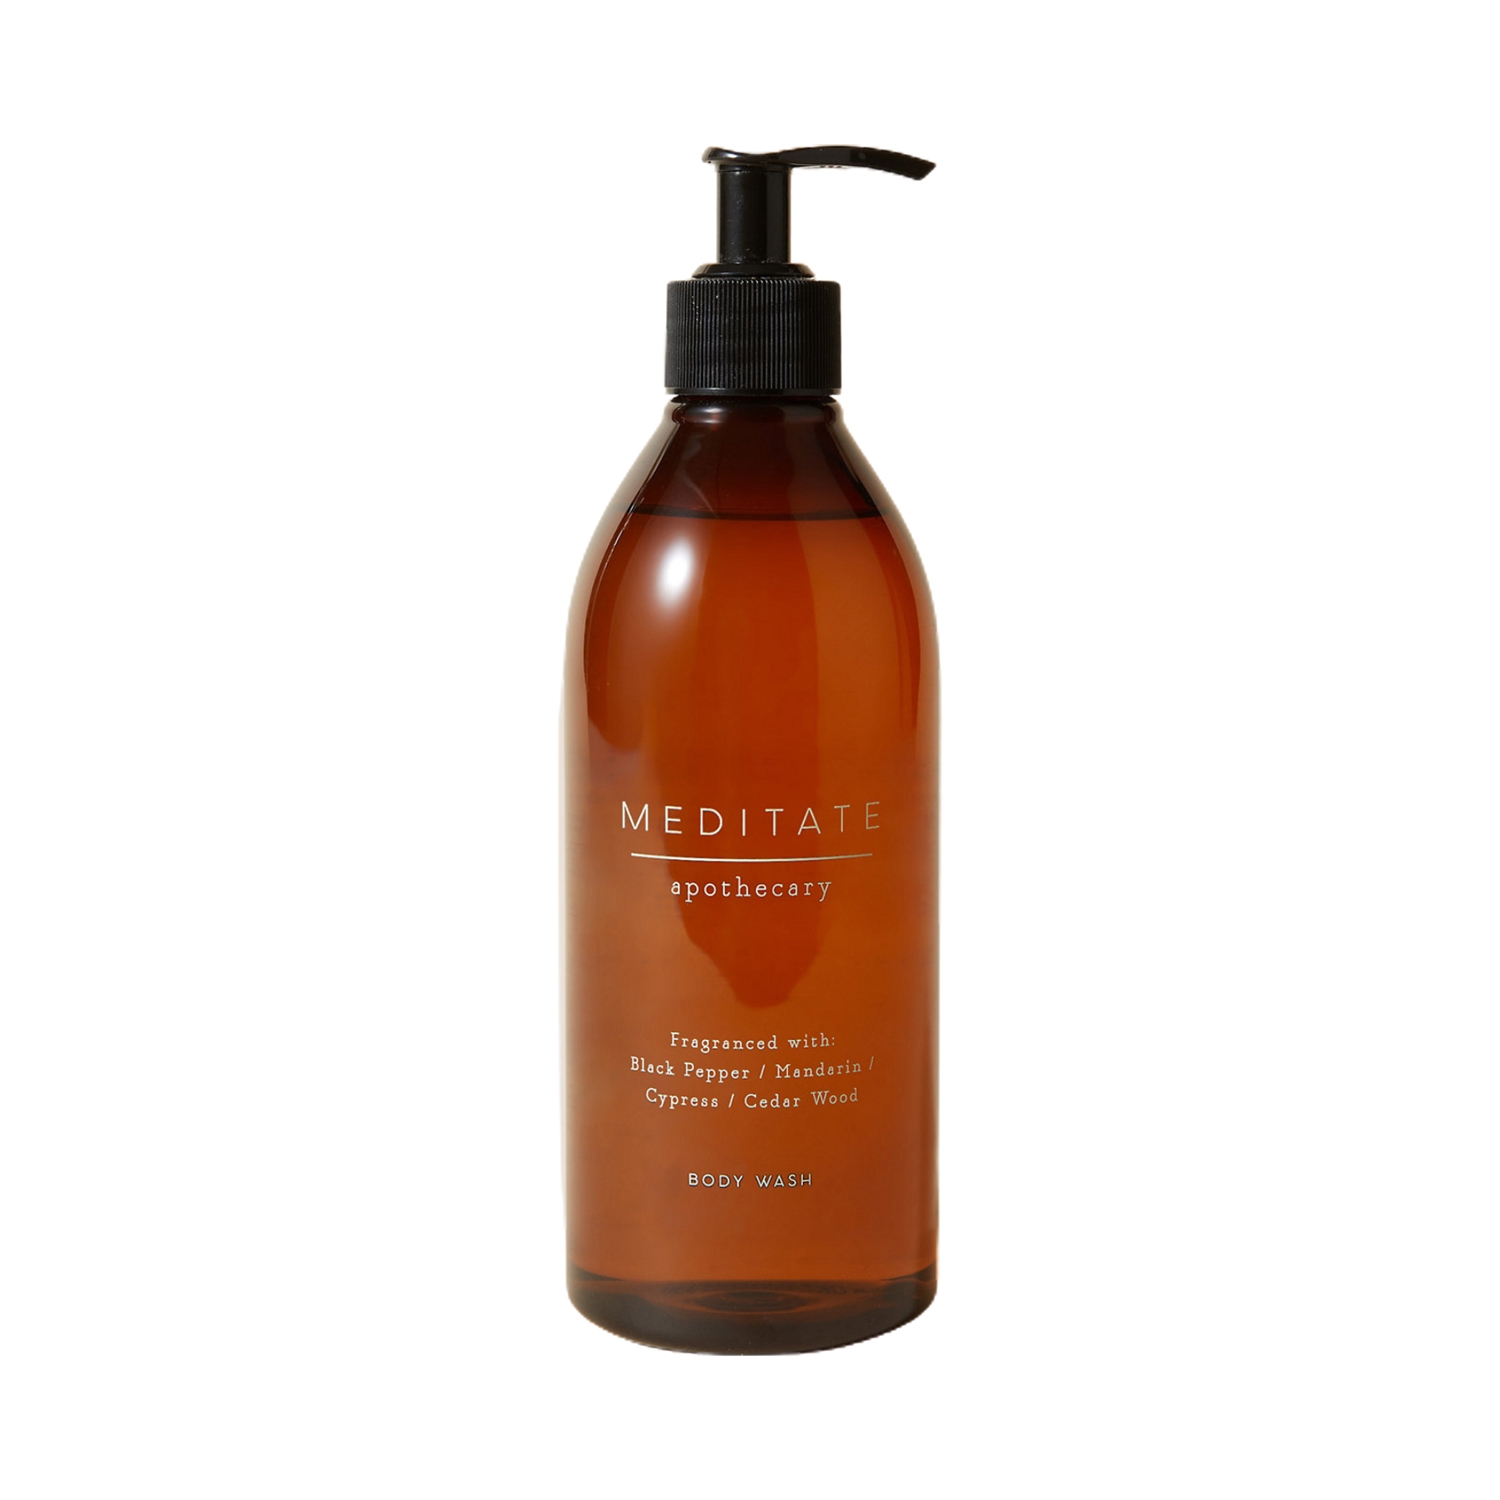 Marks & Spencer | Marks & Spencer Apothecary Meditate Body Wash (470ml)